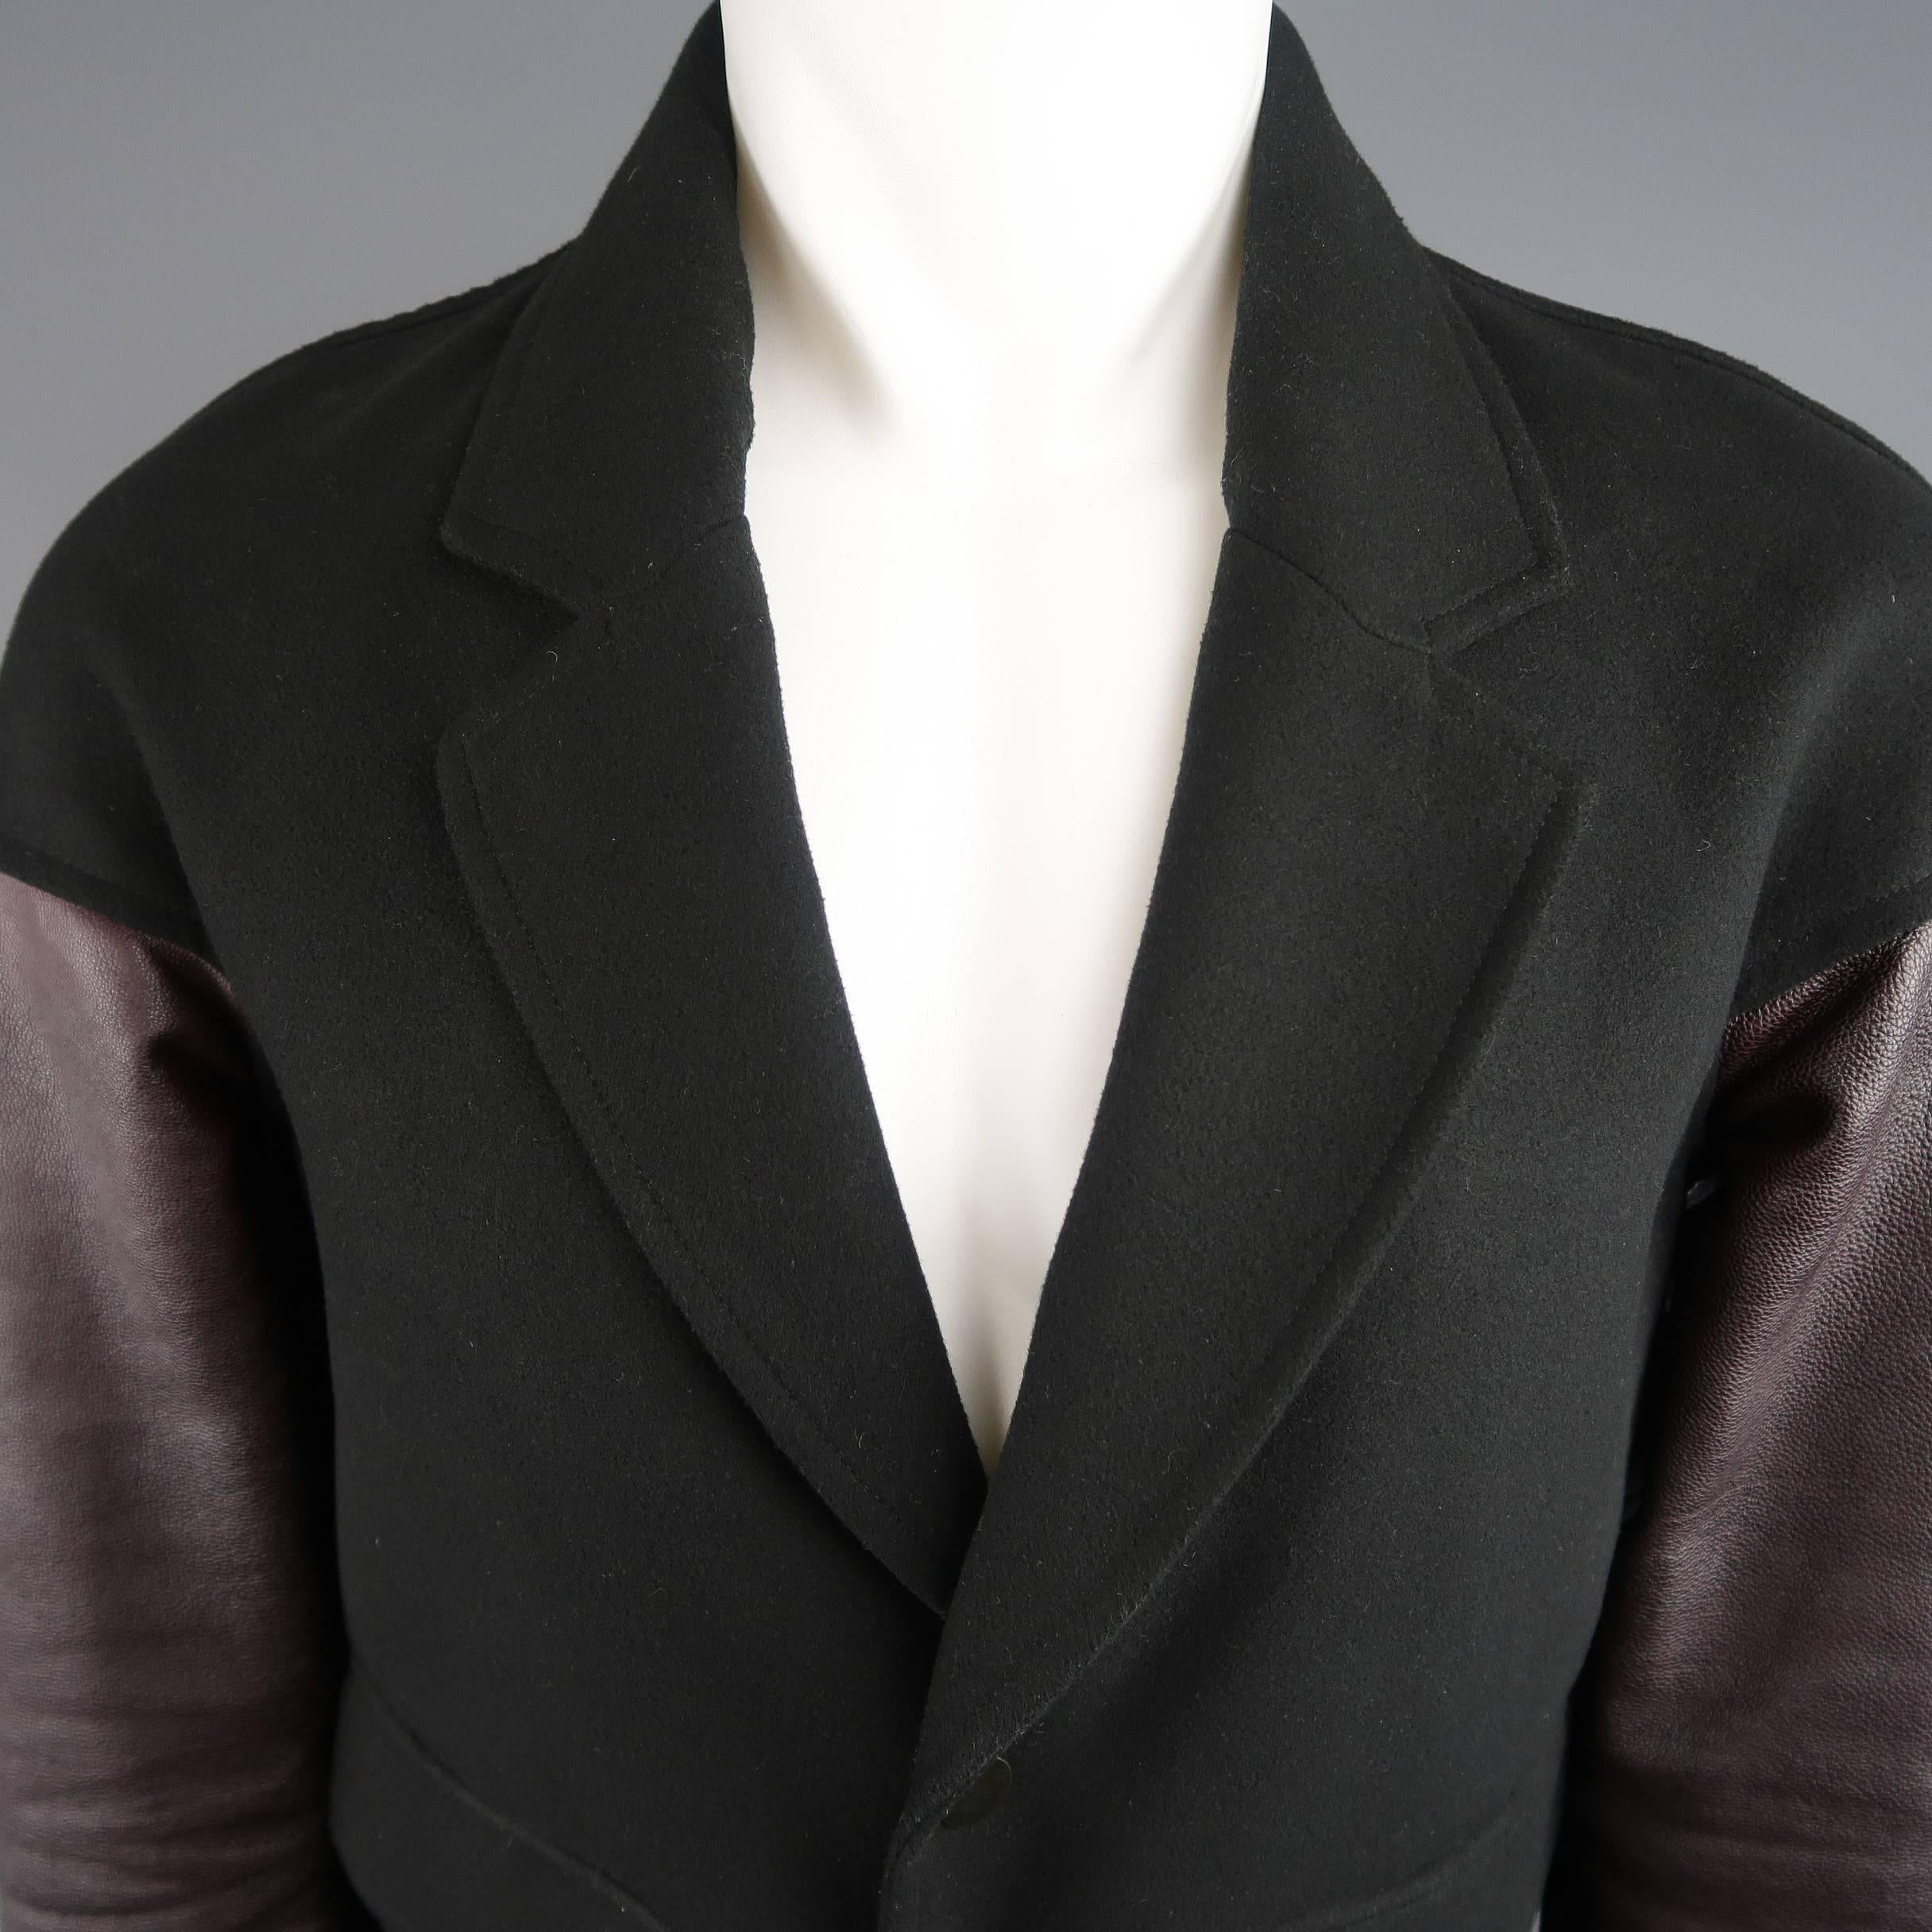 ALEXANDER WANG bomber jacket comes in black wool felt and features a notch lapel, snap closure, flap pockets with diagonal slit, and burgundy leather baseball sleeves. Wear throughout.
 
Good Pre-Owned Condition.
Marked: XS
 
Measurements:
